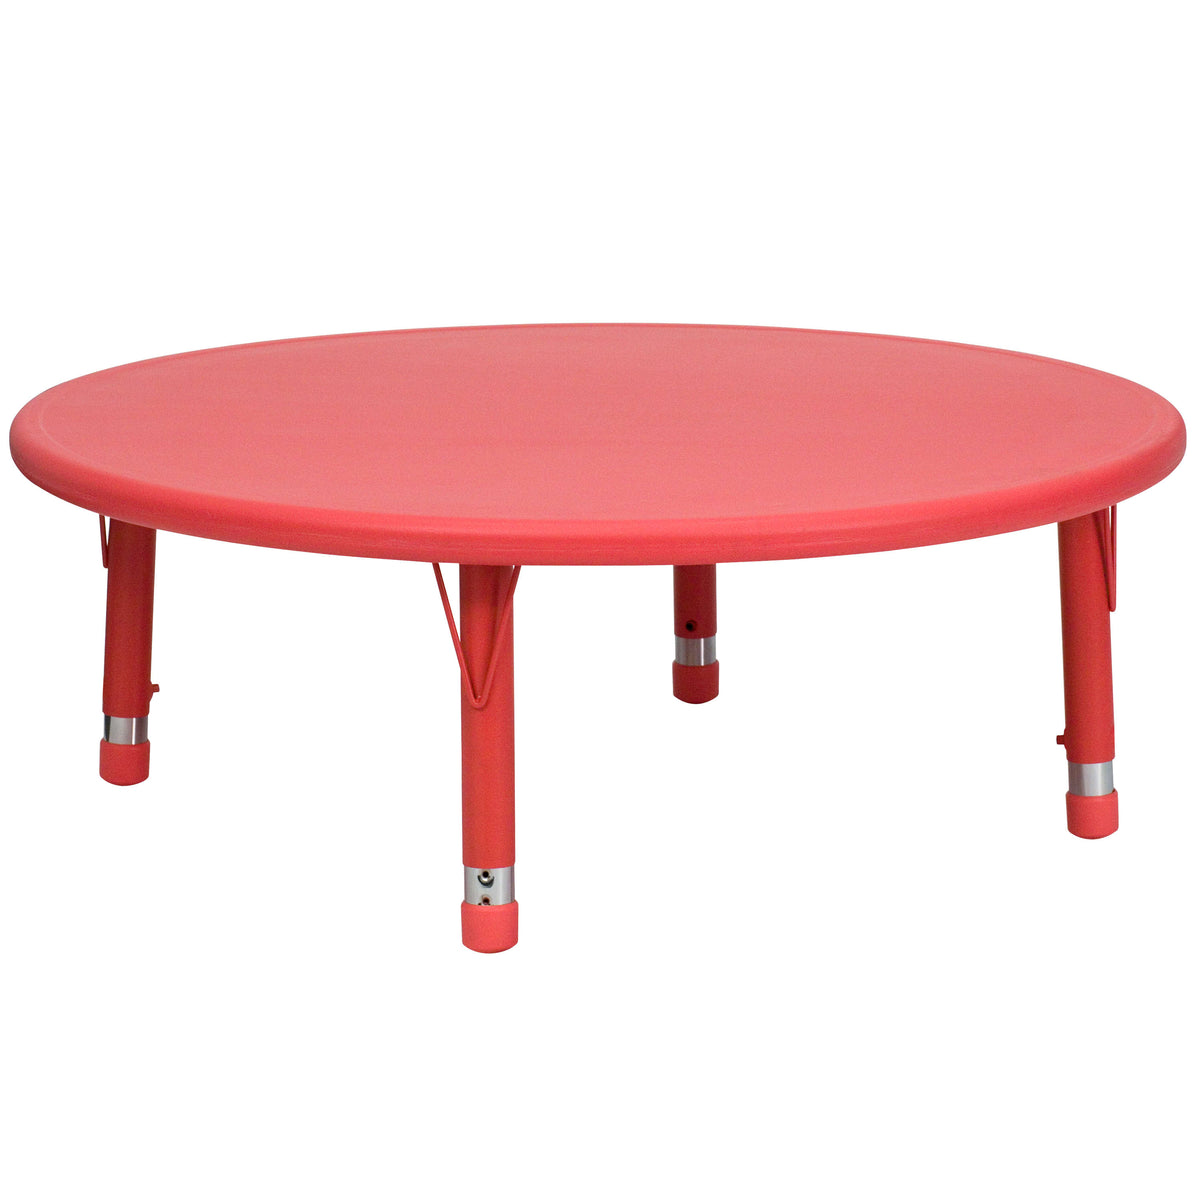 Red |#| 45inch Round Red Plastic Height Adjustable Activity Table